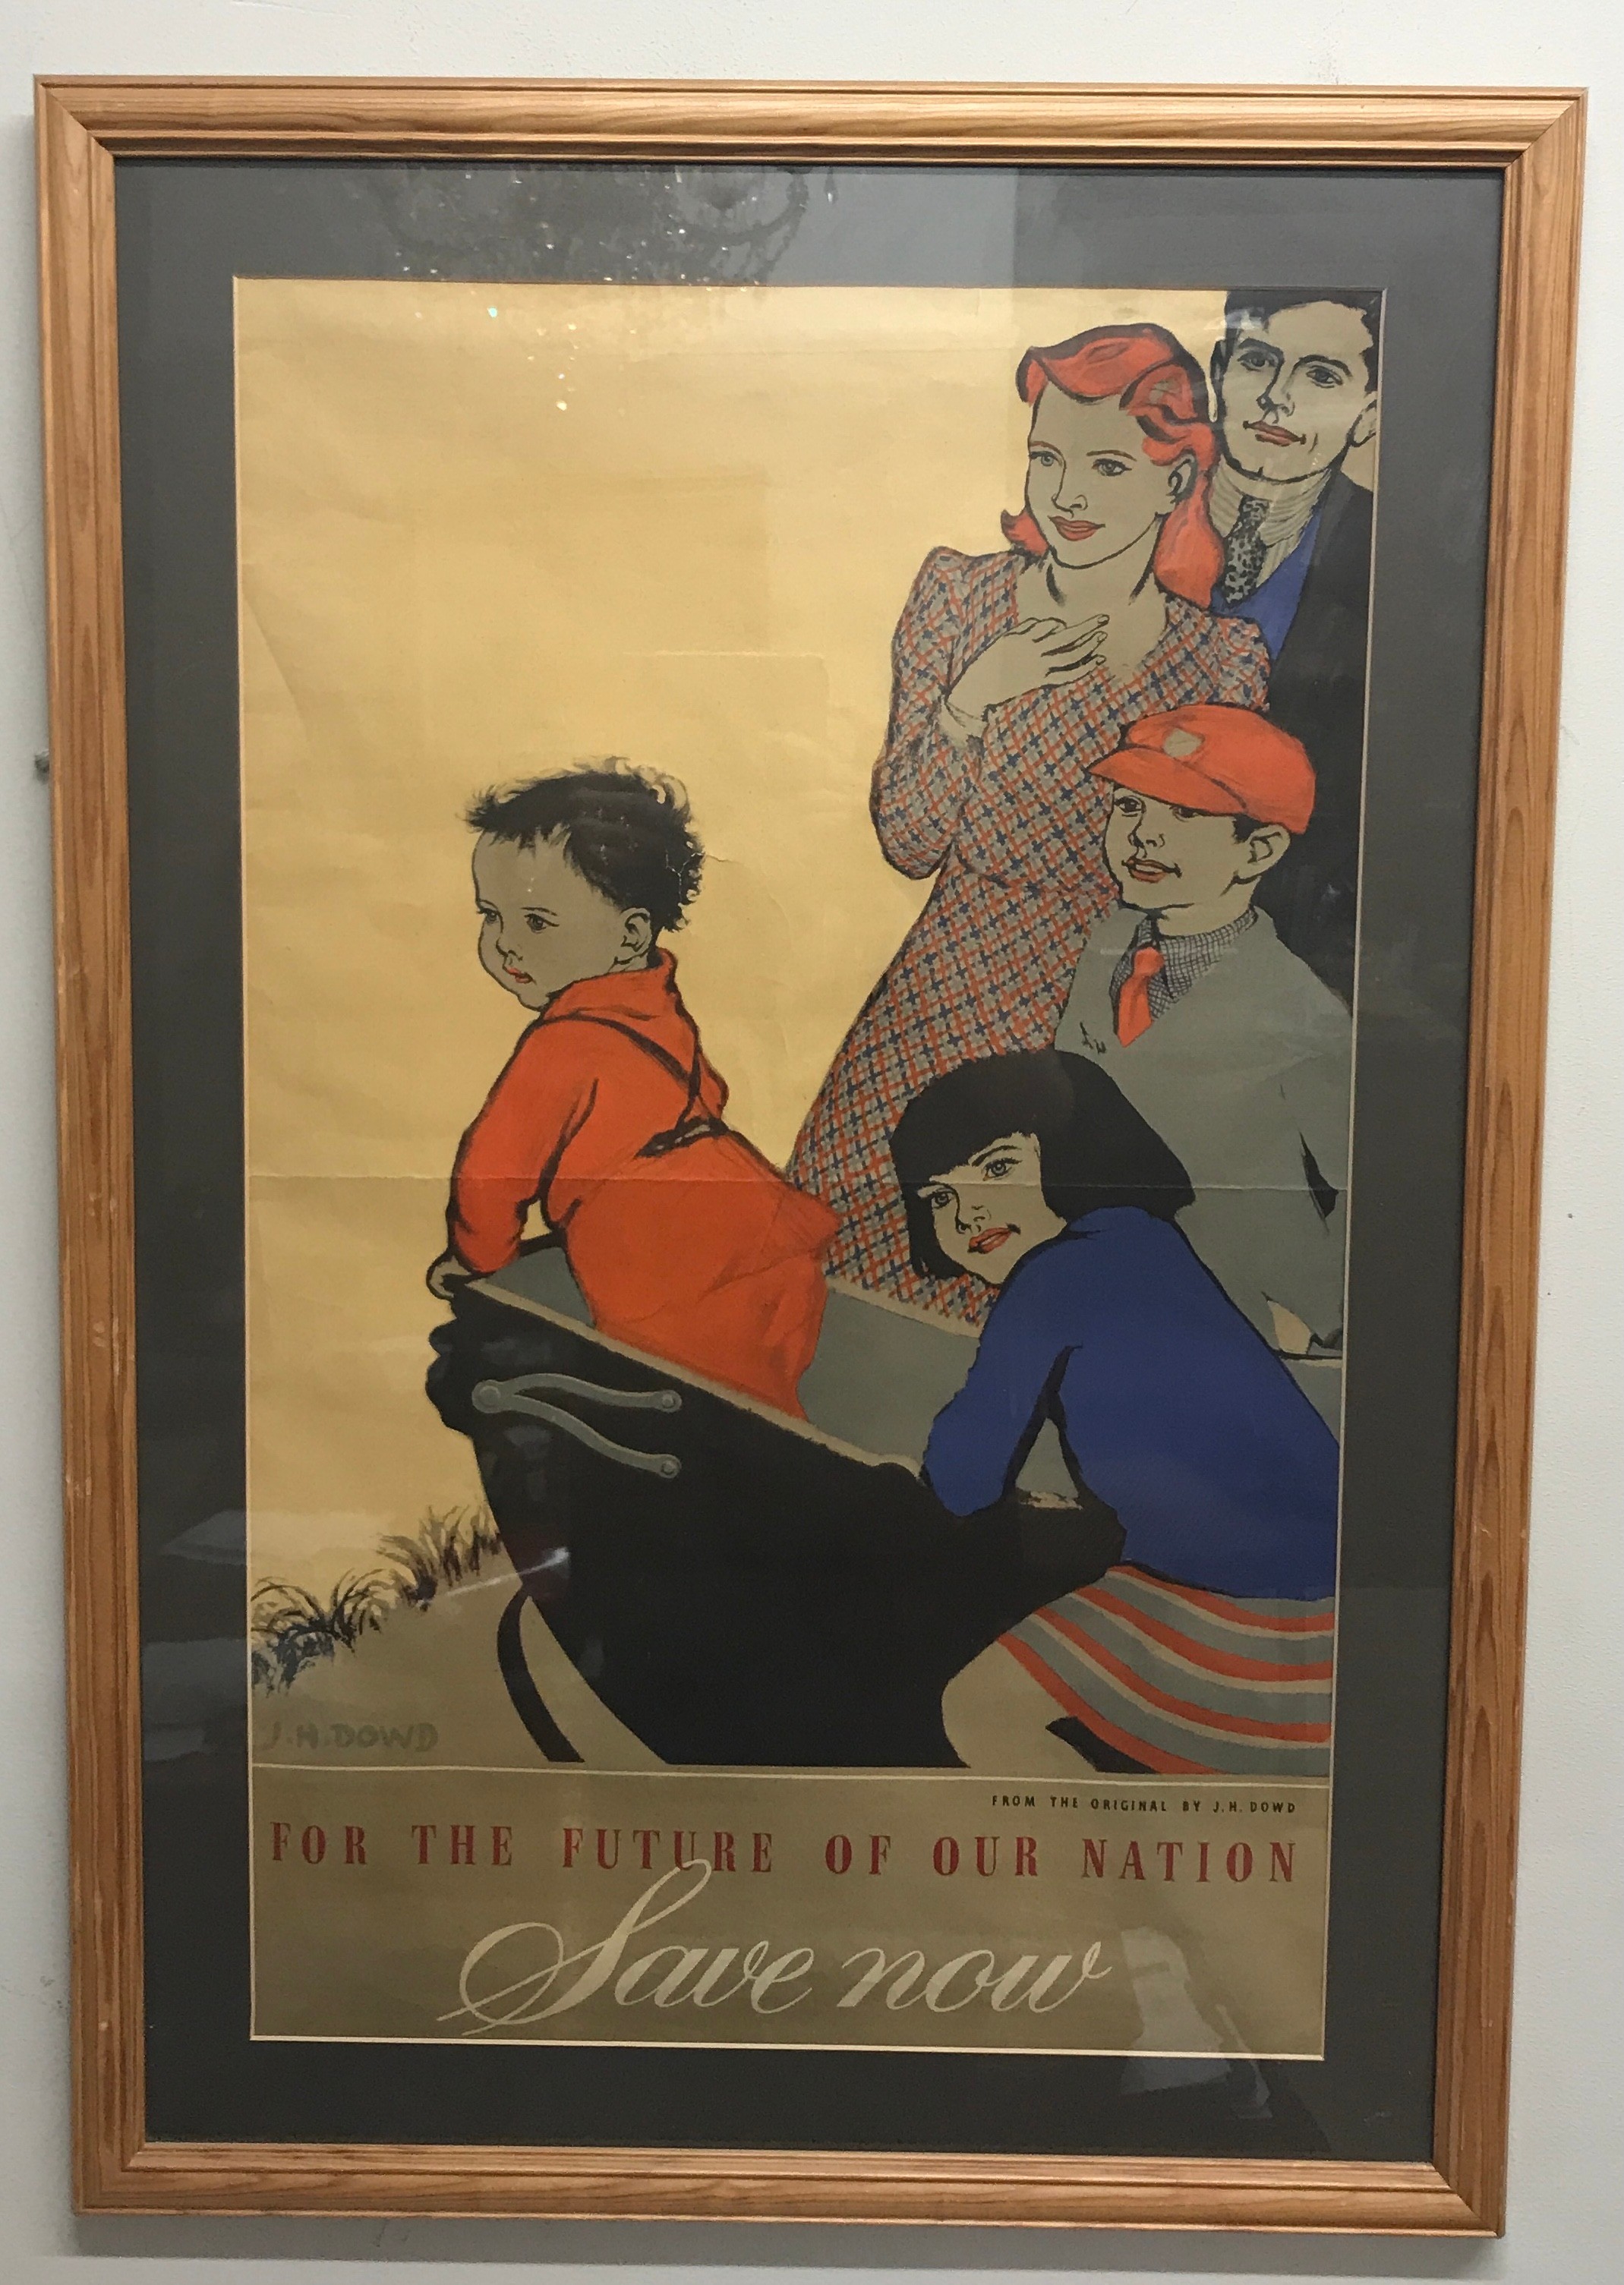 'For The Future of Our Nation Save Now', from the original National Savings Committee poster by J.H.